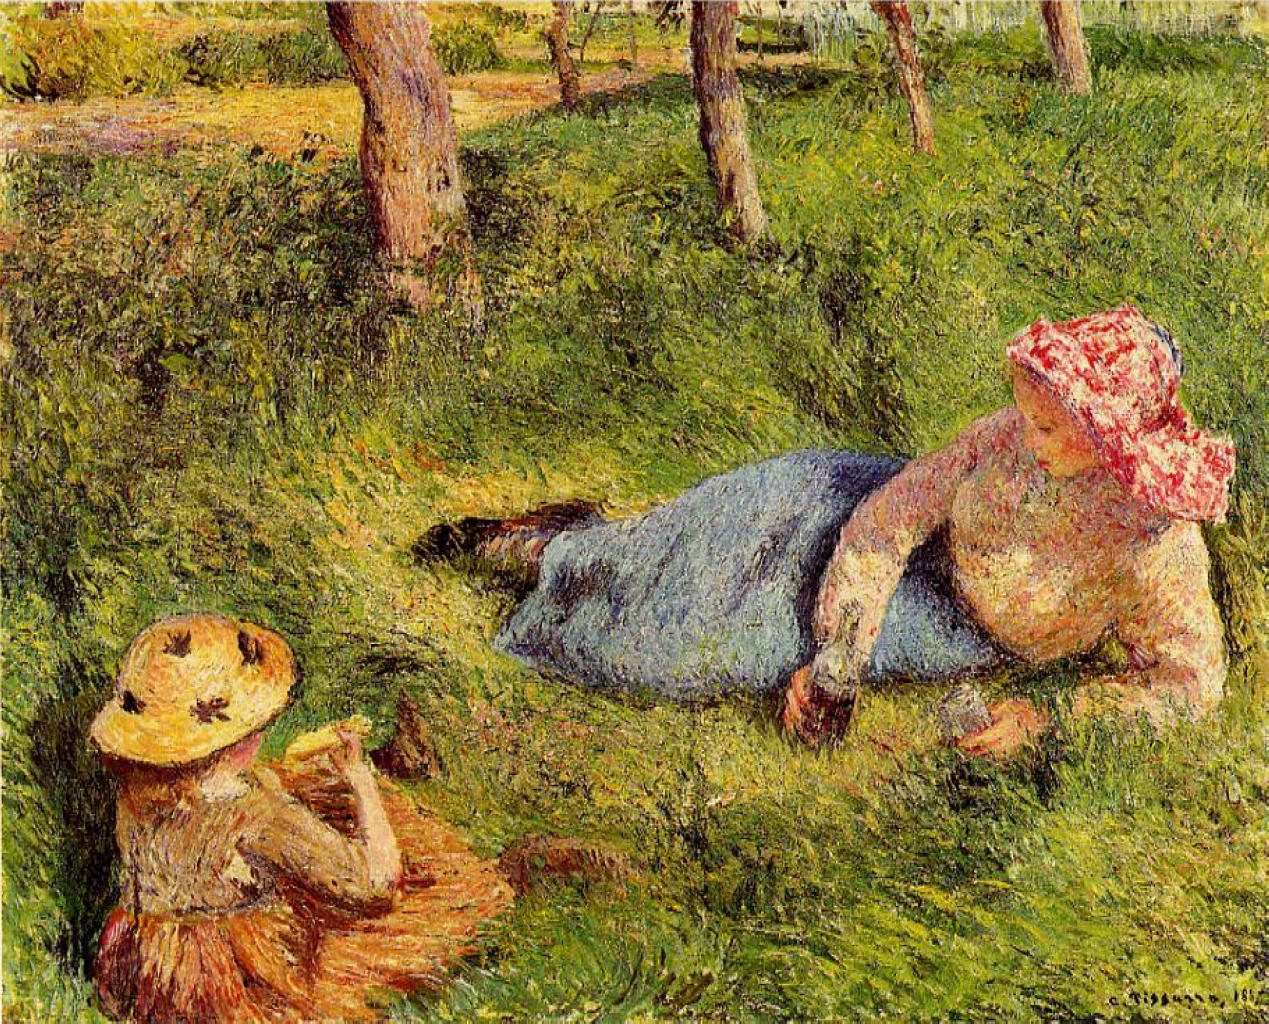 The Snack, Child and Young peasant at Rest by Camille Pissarro, 1882